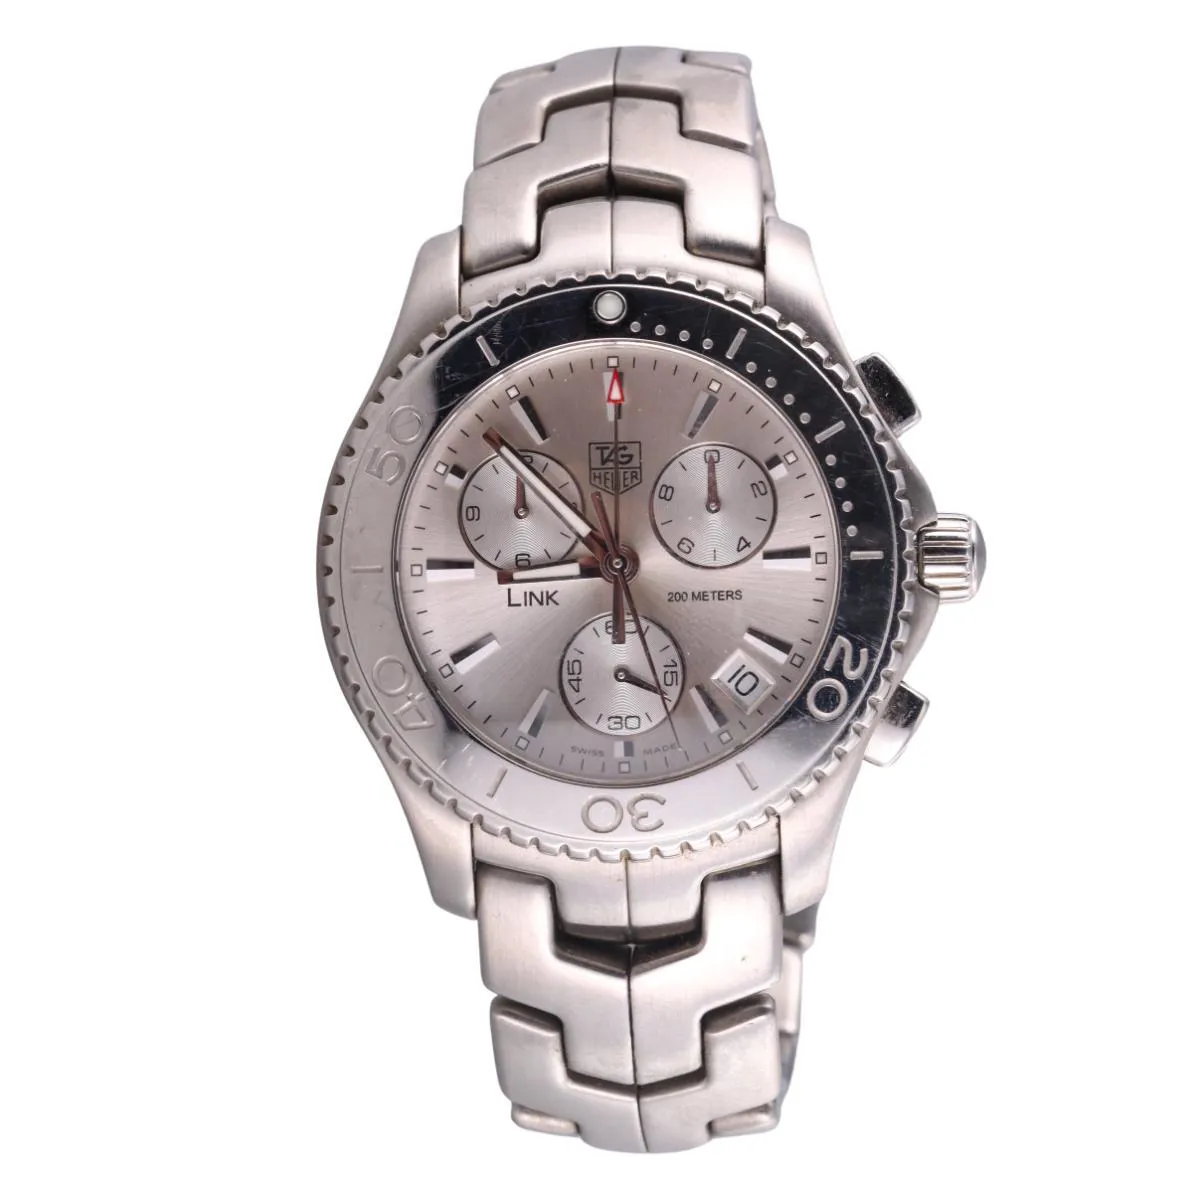 TAG Heuer Link CJ1111 40mm Stainless steel